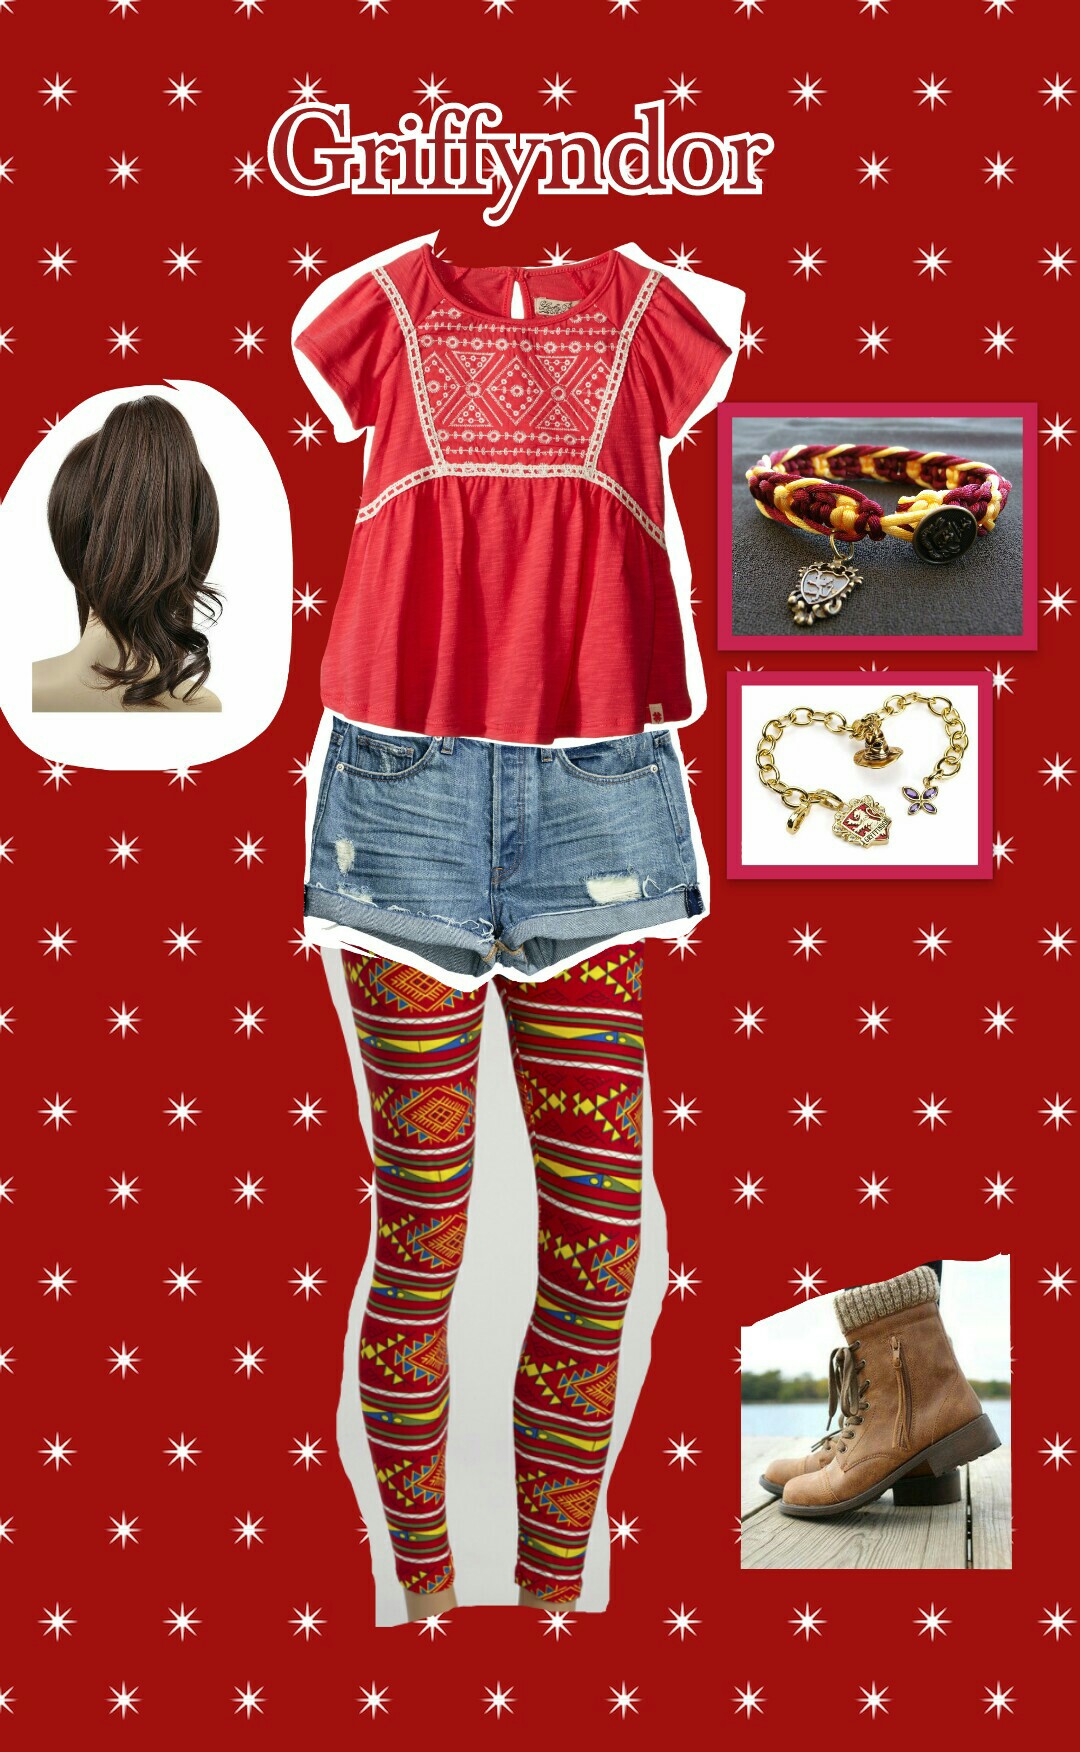 Gryffindor normal outfit.... If u want to see other house comment which one u want to see next!!!